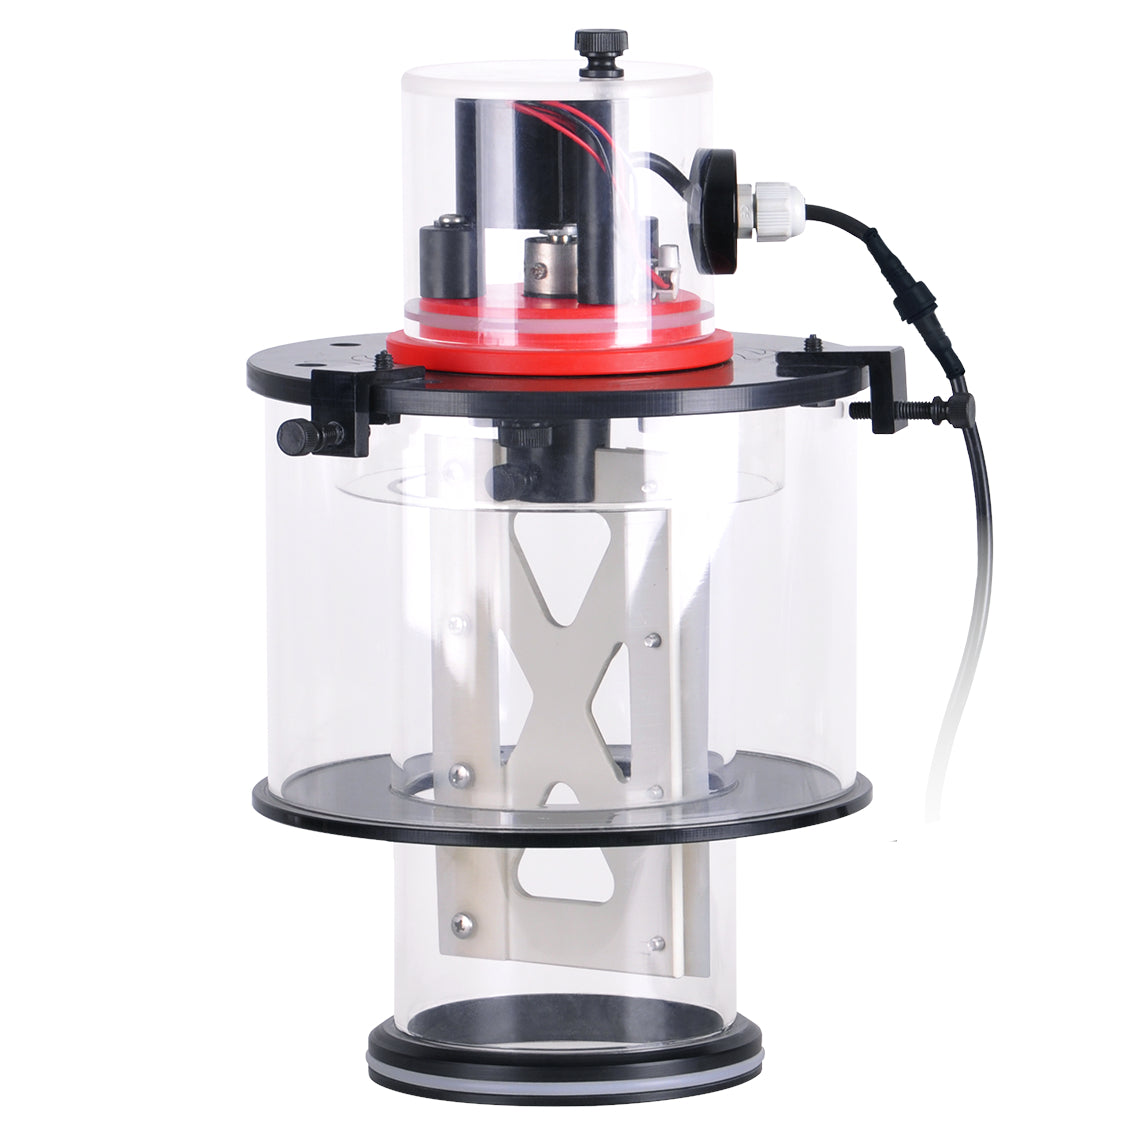 Reef Octopus Protein Skimmer Automatic Cup & Neck Cleaners